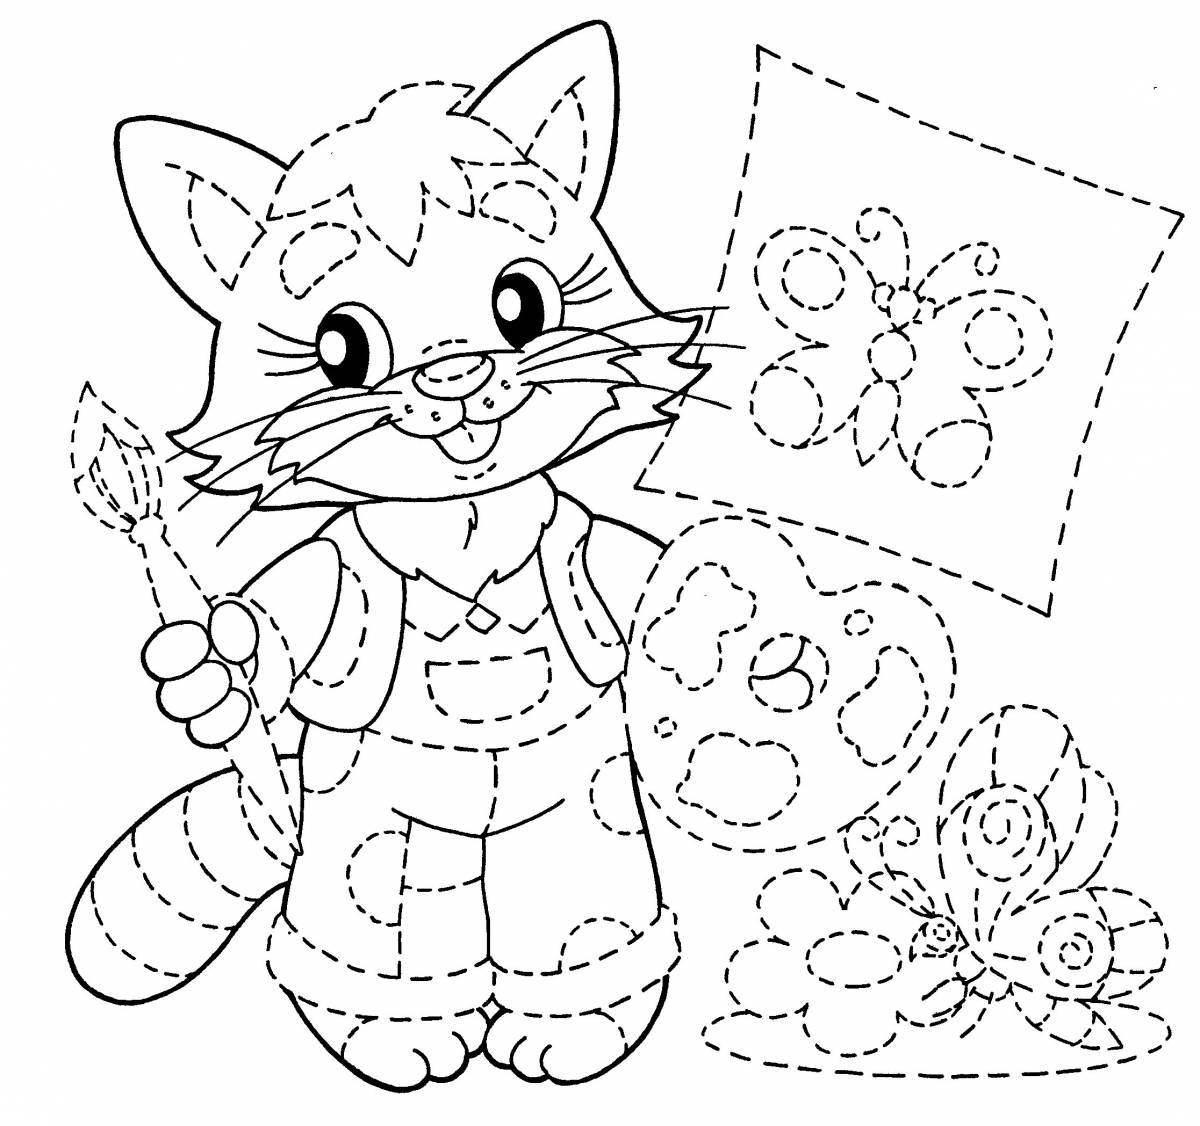 Crazy coloring book for preschoolers 5-6 years old